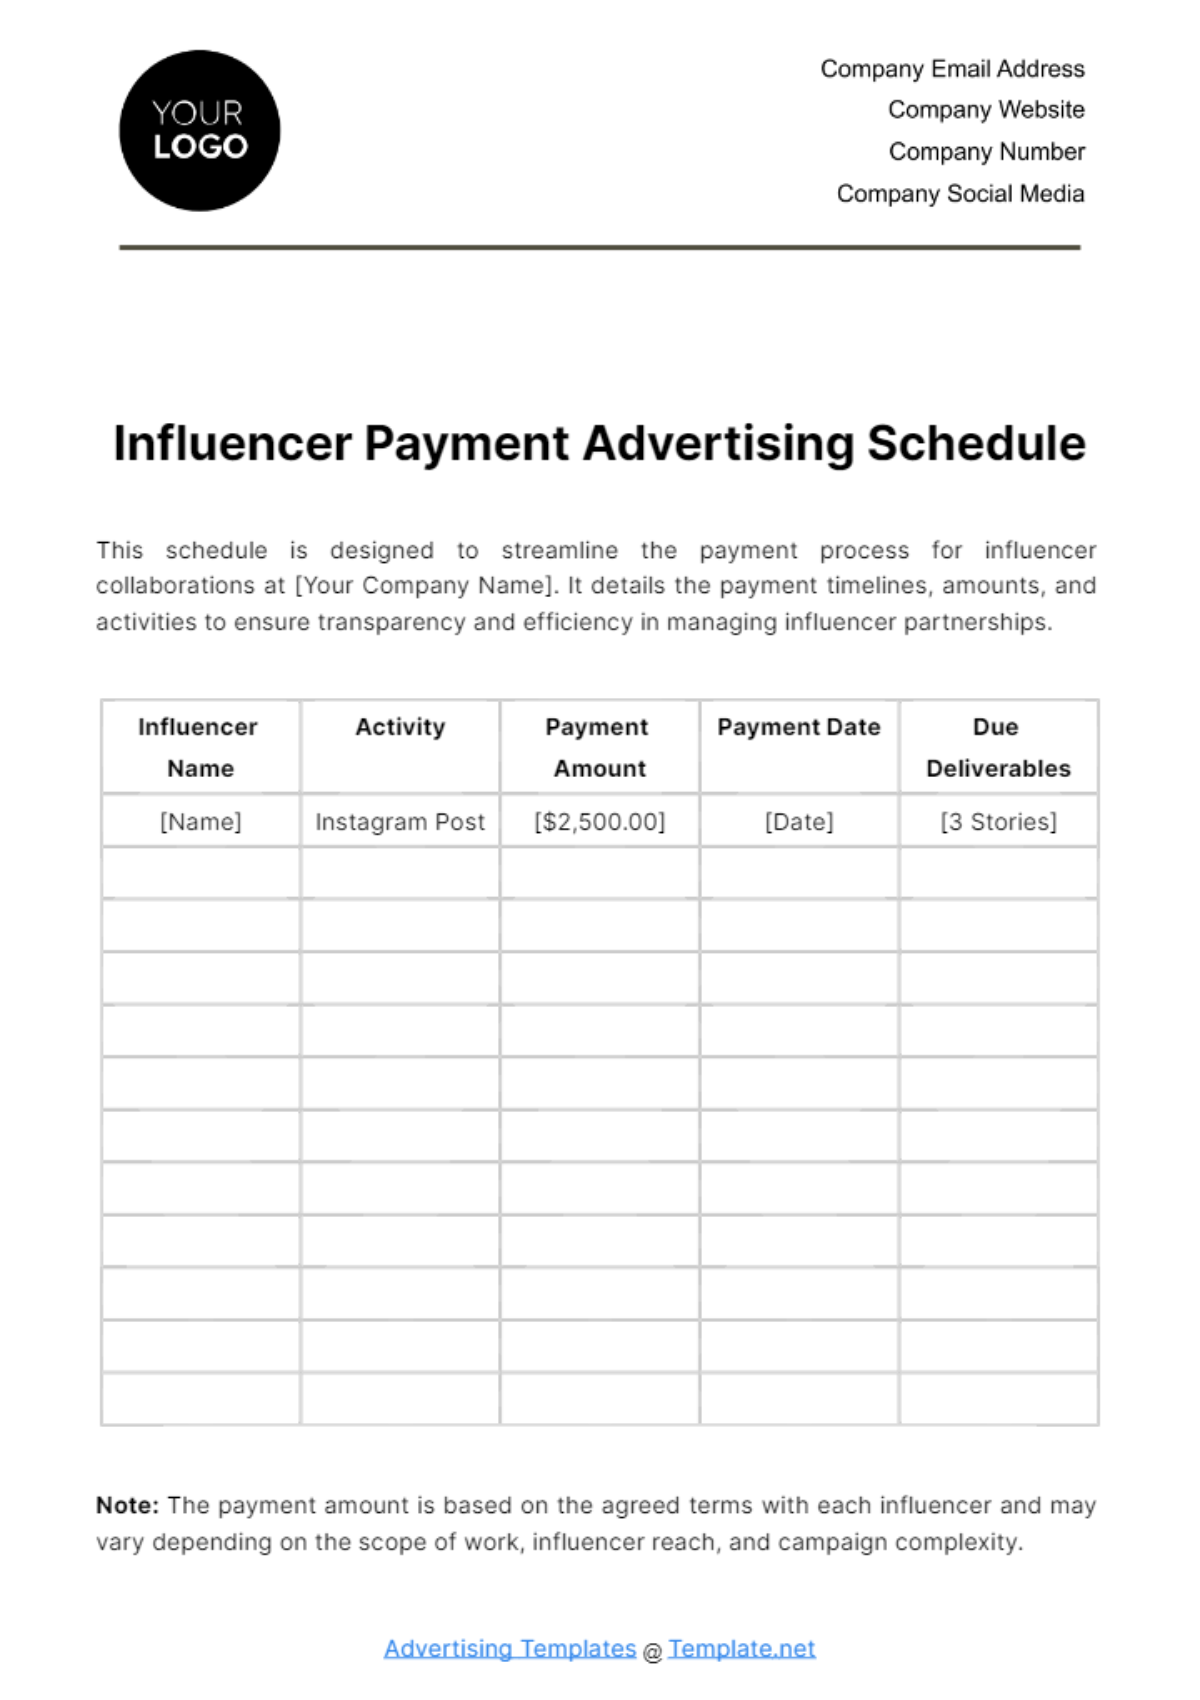 Free Influencer Payment Advertising Schedule Template